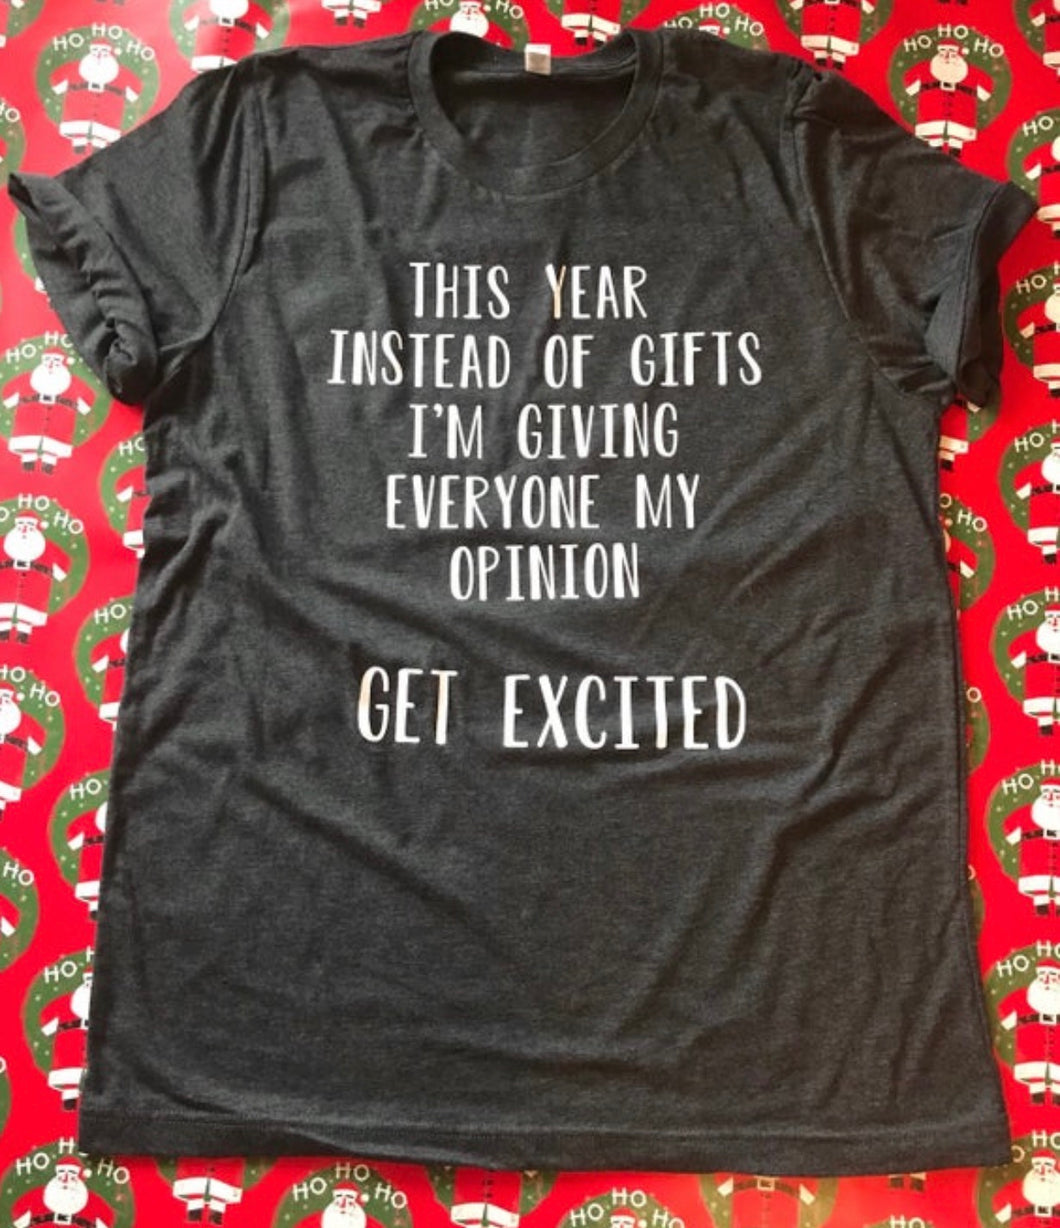 This year instead of gifts im giving everyone my opinion get excited funny christmas graphic tee tshirt. Gift. - Mavictoria Designs Hot Press Express